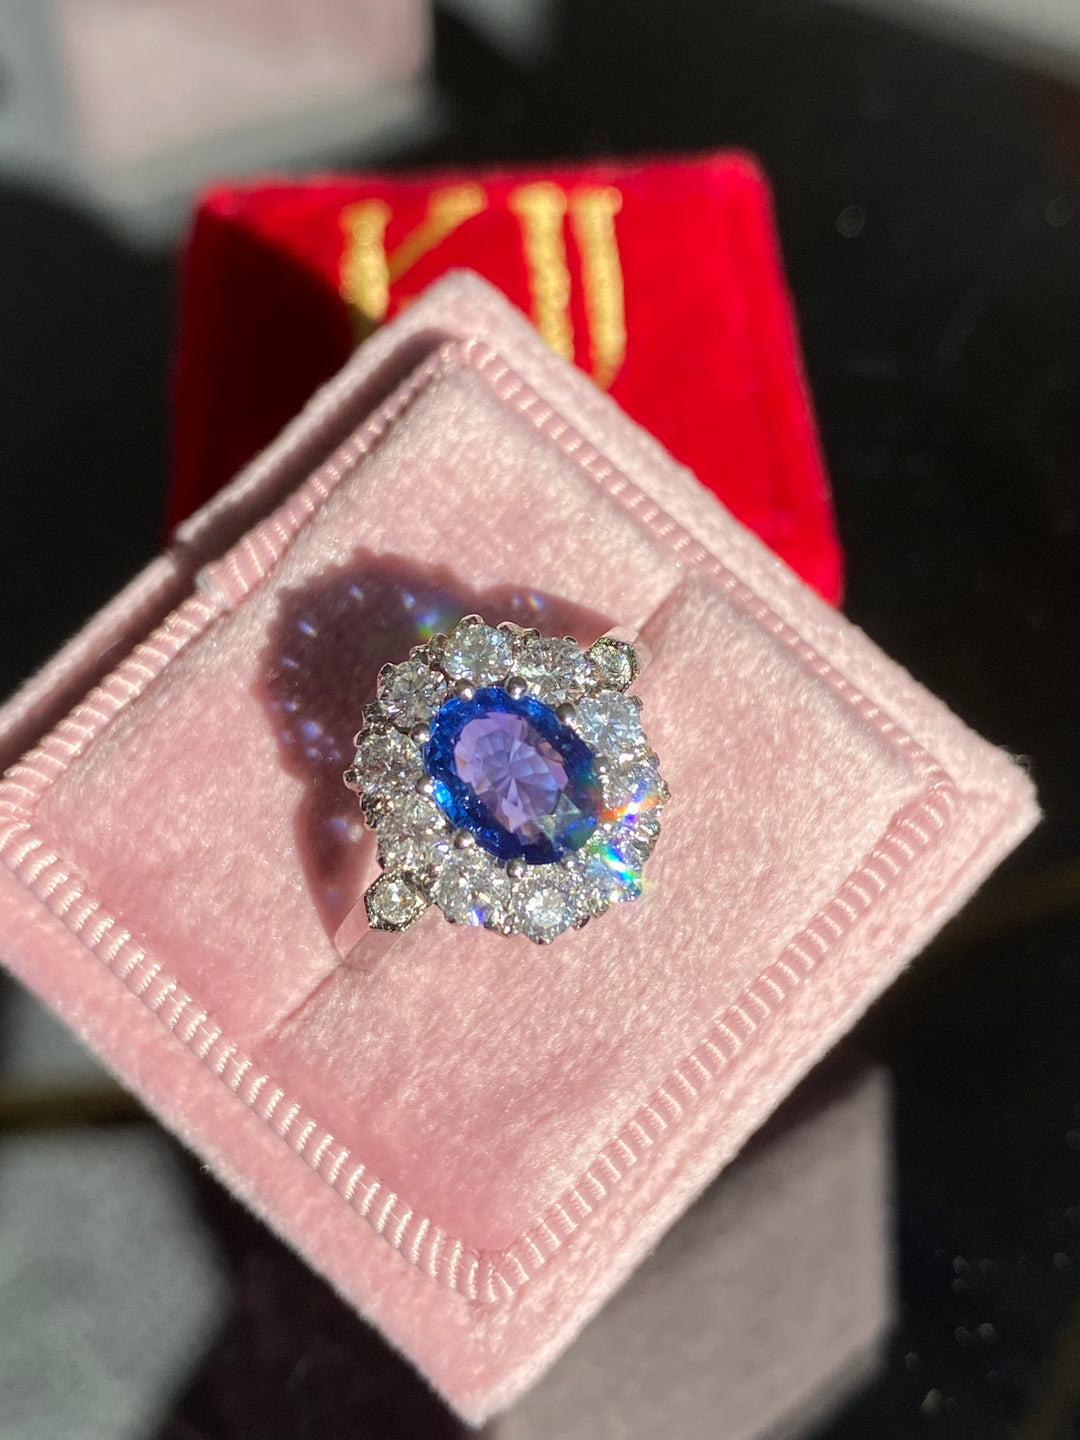 2 Carat Oval Blue Sapphire and Diamond Halo Antique Edwardian Style Engagement Ring in Platinum 